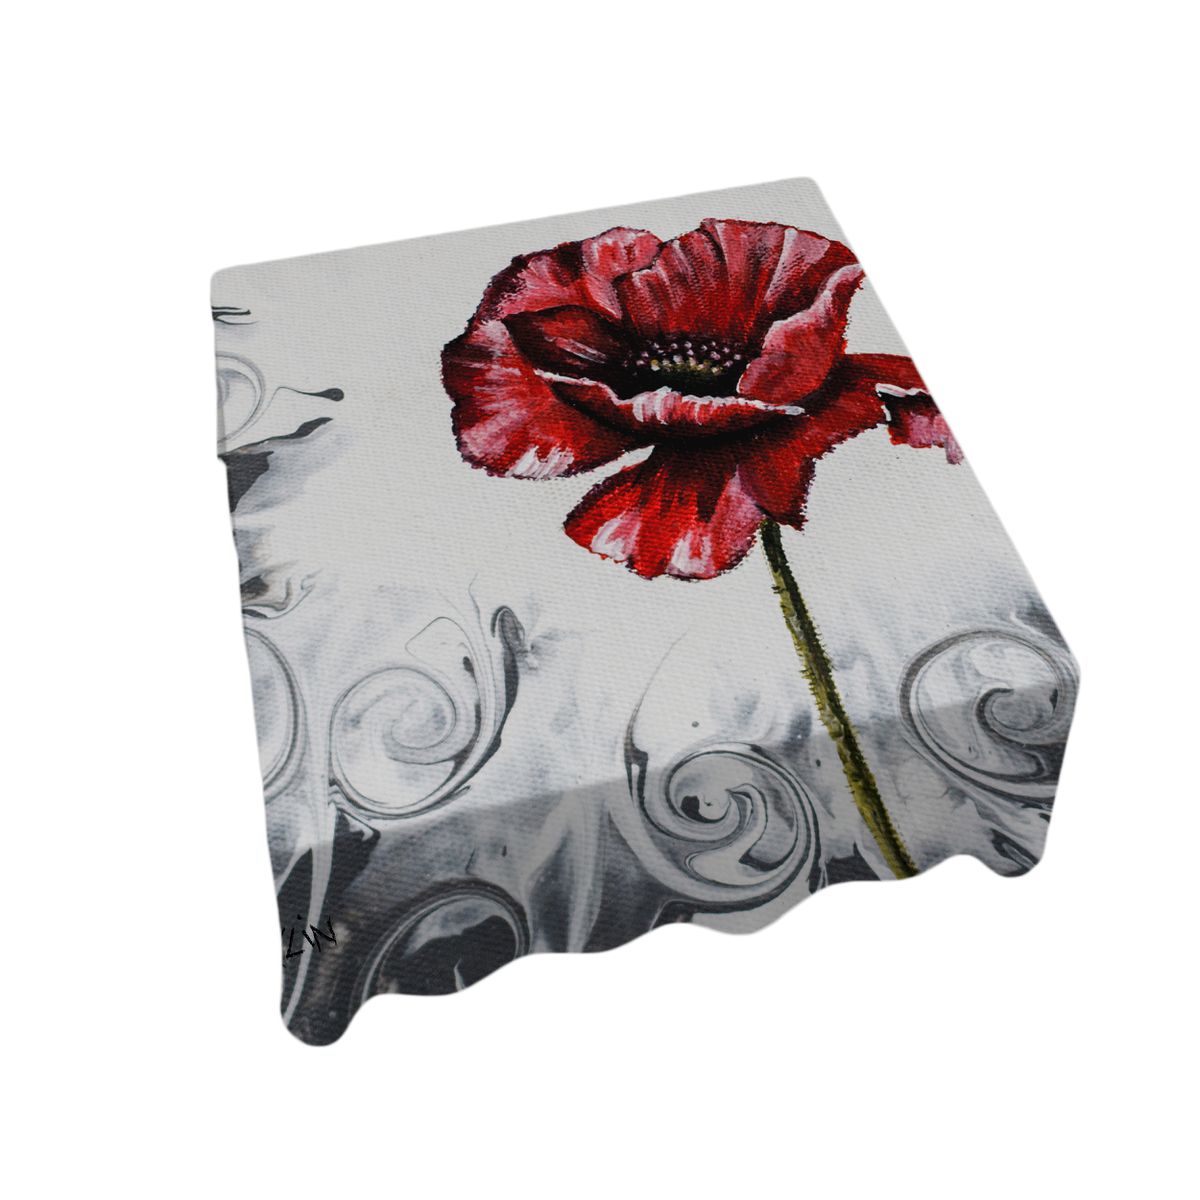 Pouring Poppies Twirls By Cherylin Louw Square Tablecloth